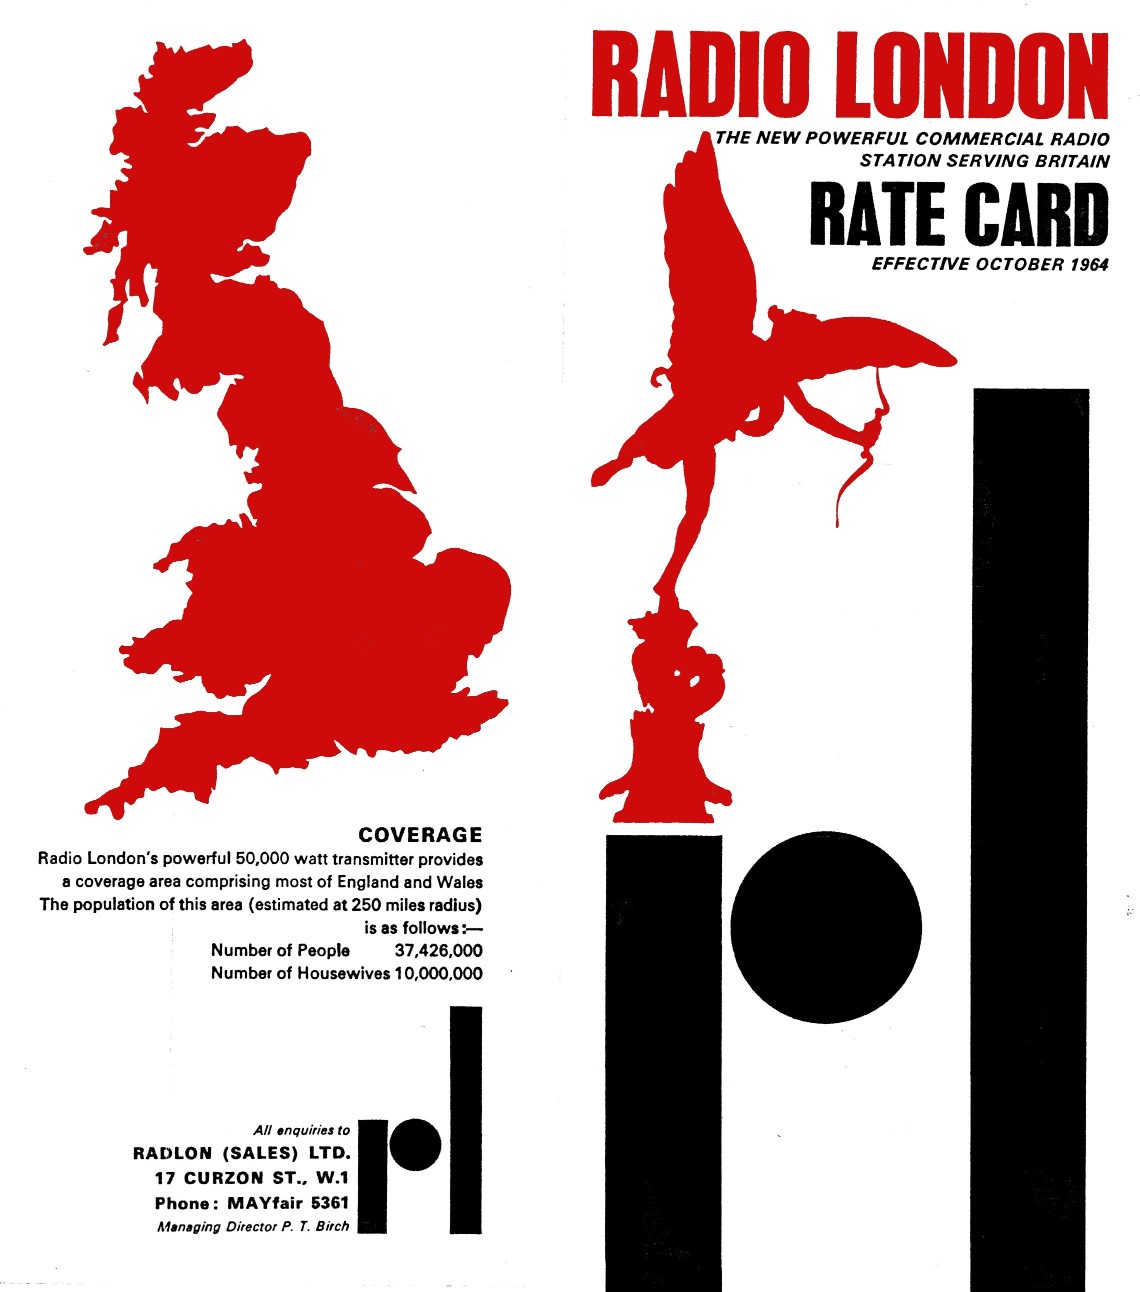 Radio London's first rate card